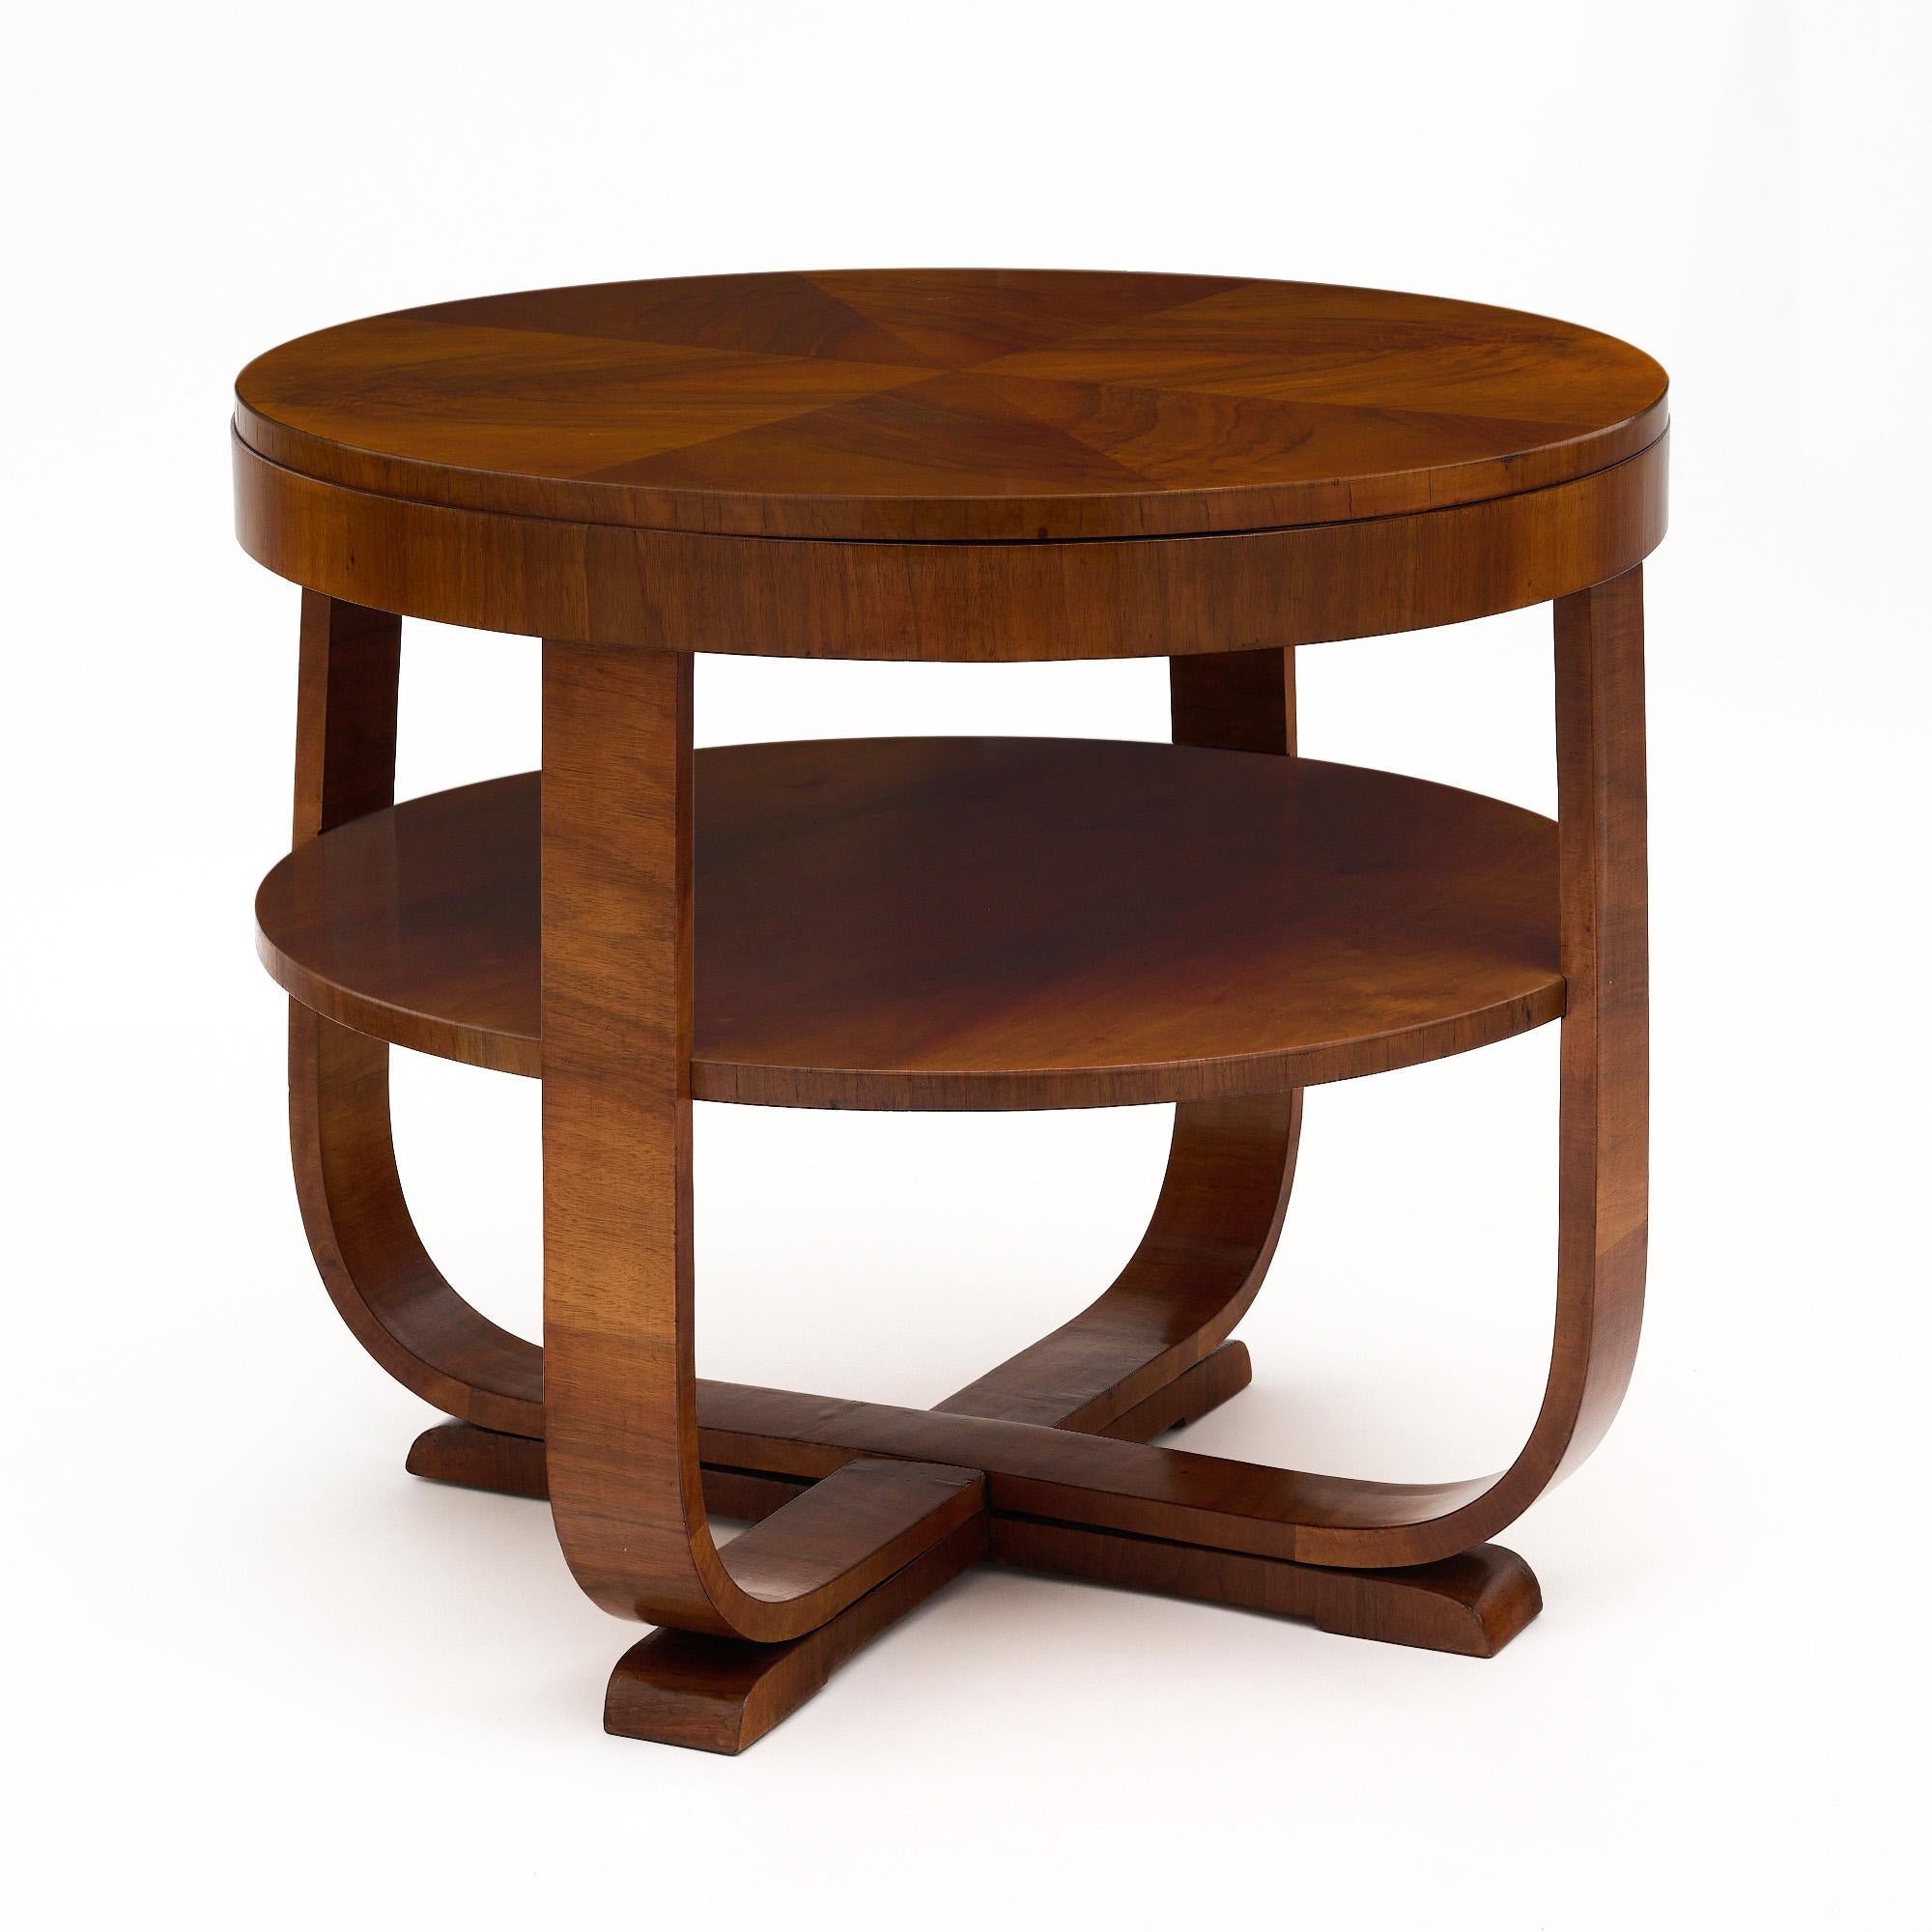 Austrian Biedermeier Art Deco gueridon from Vienna made of solid and veneered walnut with a lustrous French polish finish for a museum quality shine. Four curved legs meet at the bottom of the piece to form a quadrupled base and hold a second shelf.